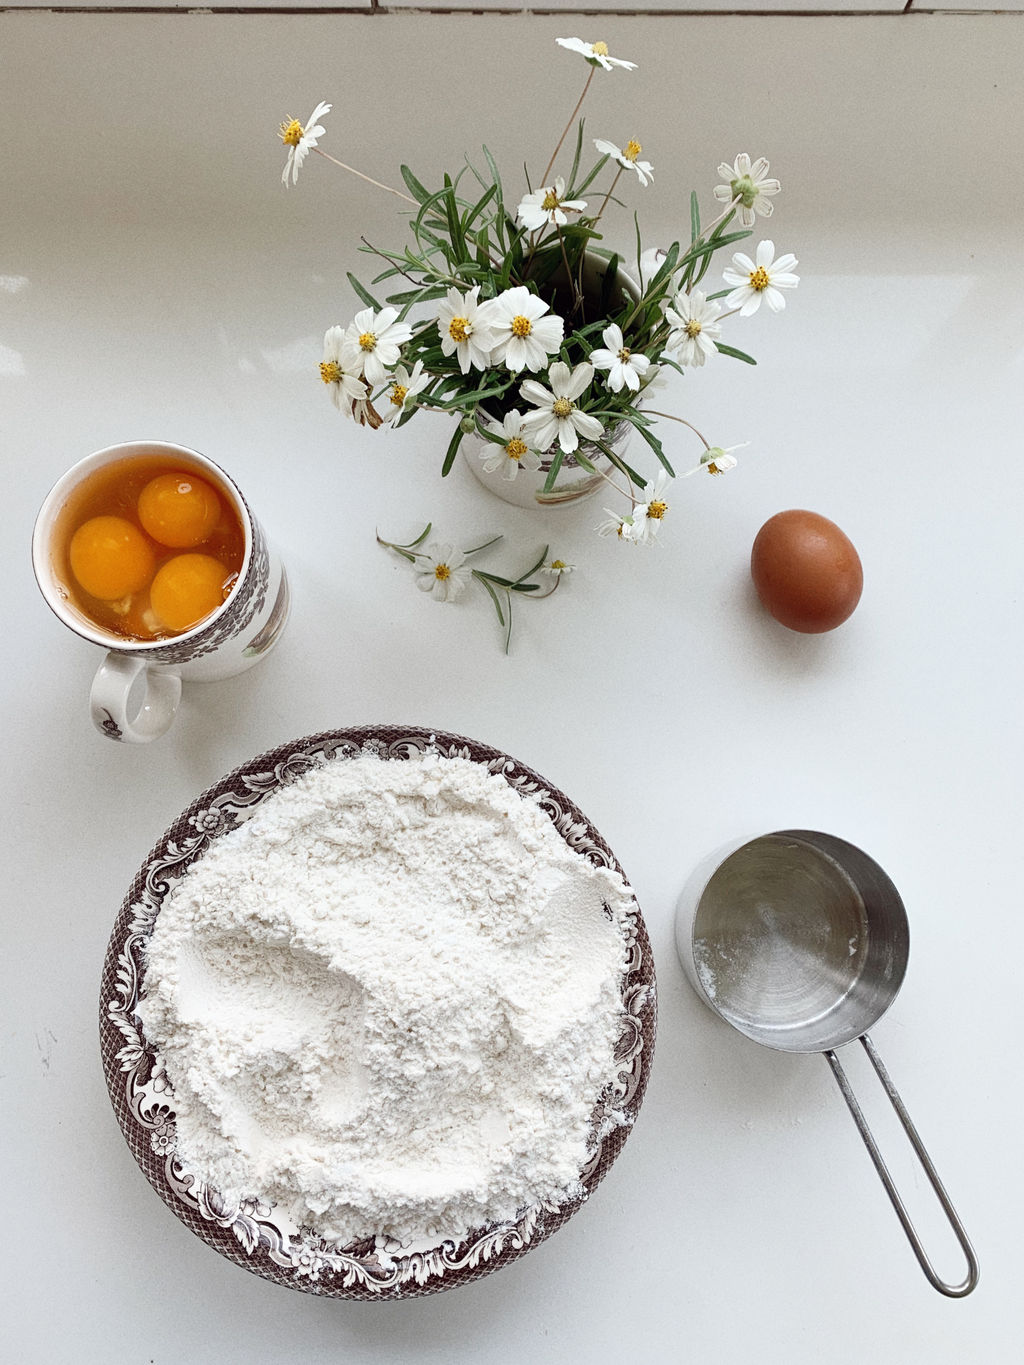 ingredients for fresh ricotta for fresh lemons for Lemon Ricotta Pound Cake Recipe is the perfect weekend baking project